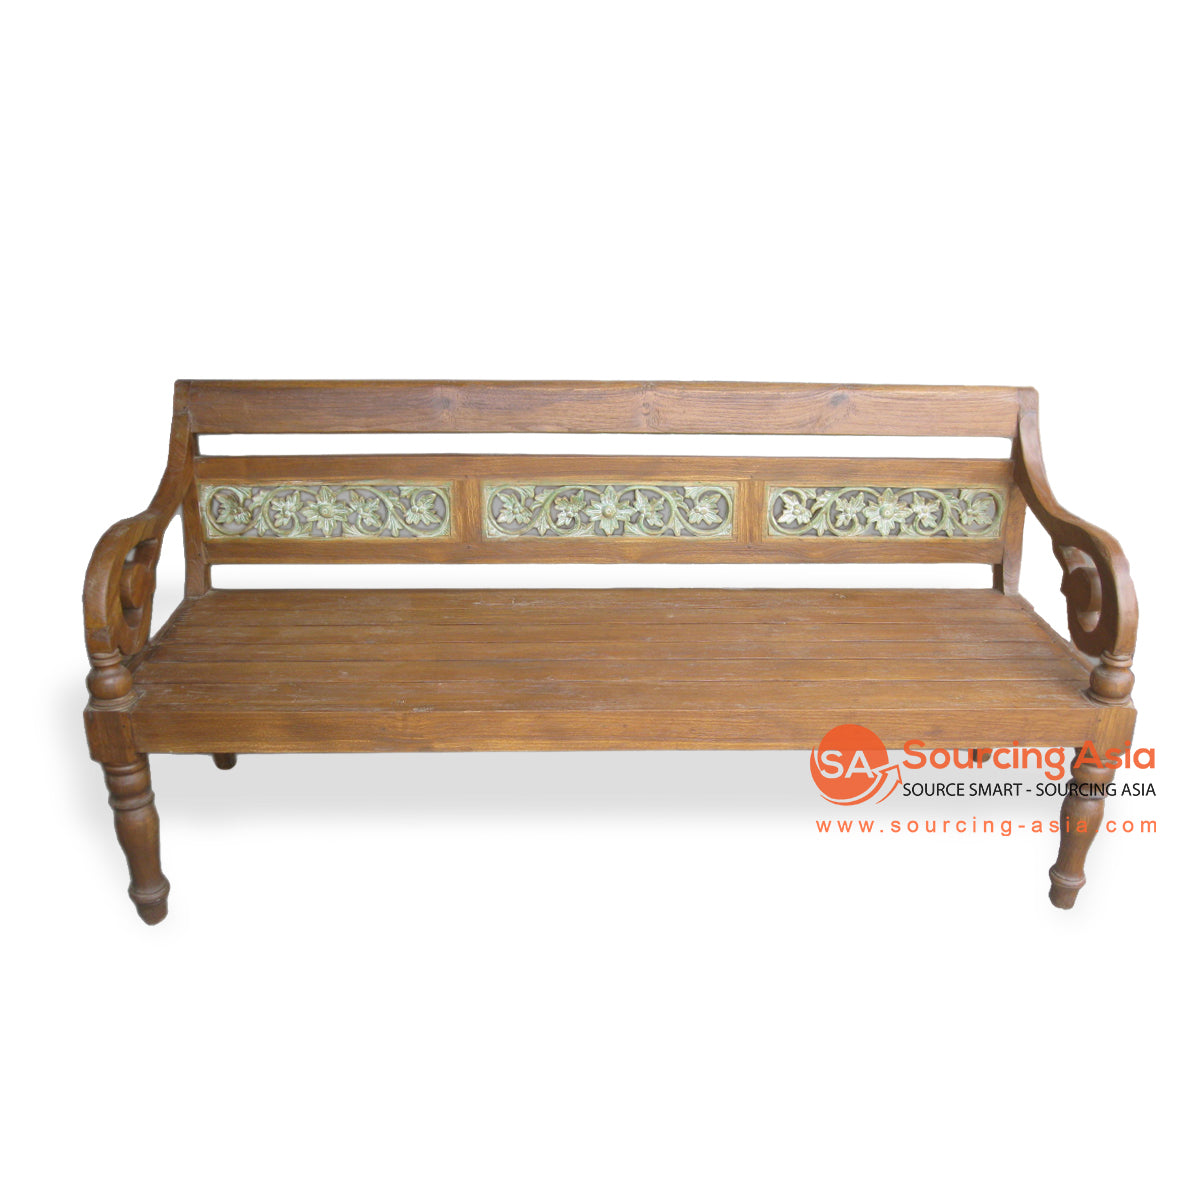 LAC020 NATURAL RECYCLED TEAK WOOD RAFFLES UPHOLSTERED CARVED BENCH